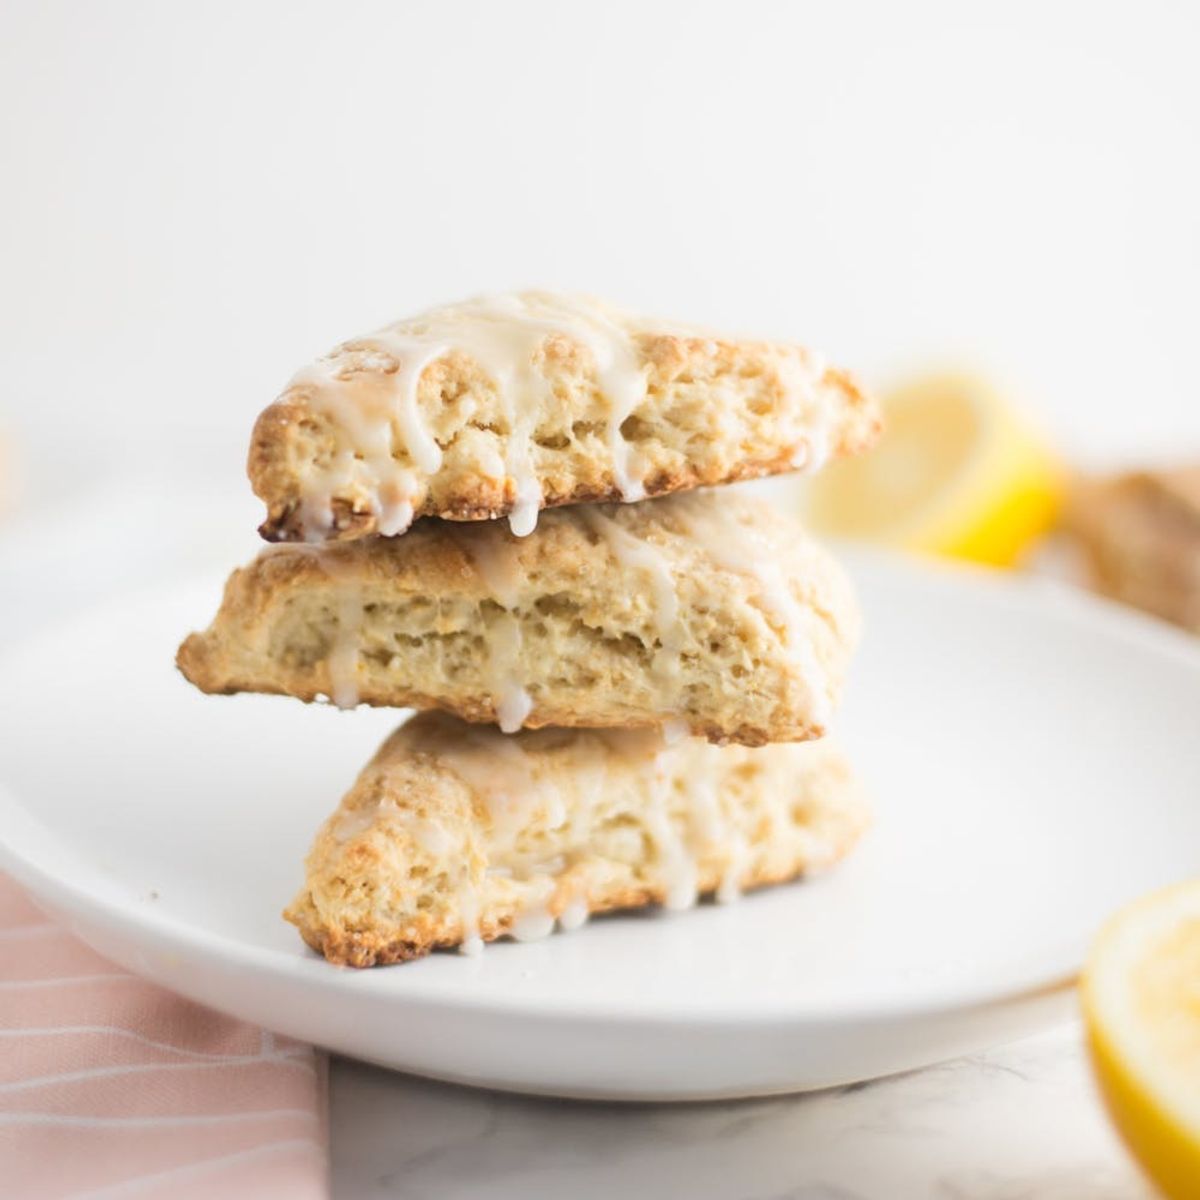 Get Your Easter Brunch on With These Vegan Lemon Scones Recipe